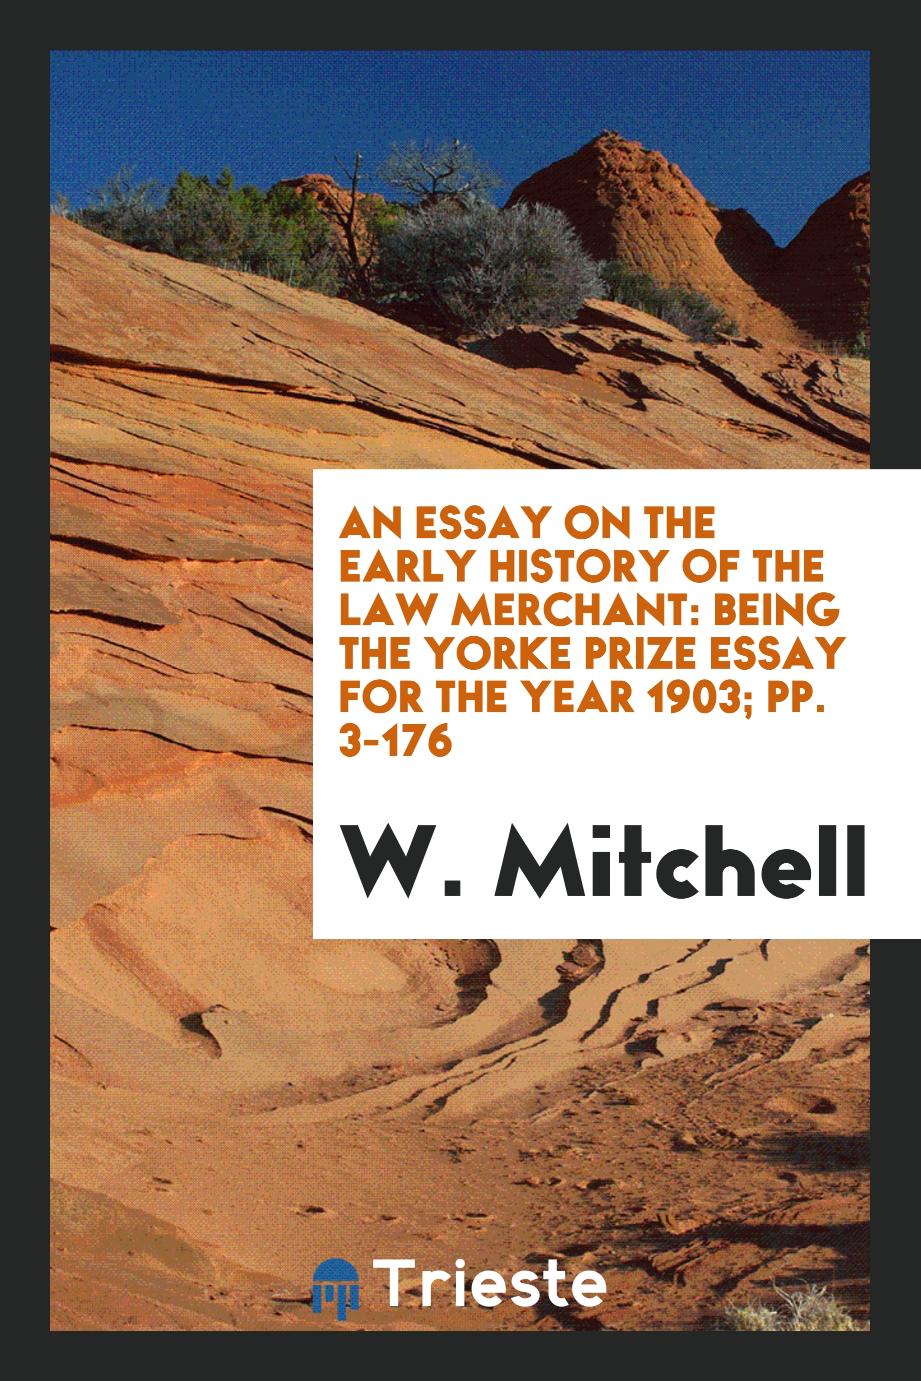 An Essay on the Early History of the Law Merchant: Being the Yorke Prize Essay for the Year 1903; pp. 3-176